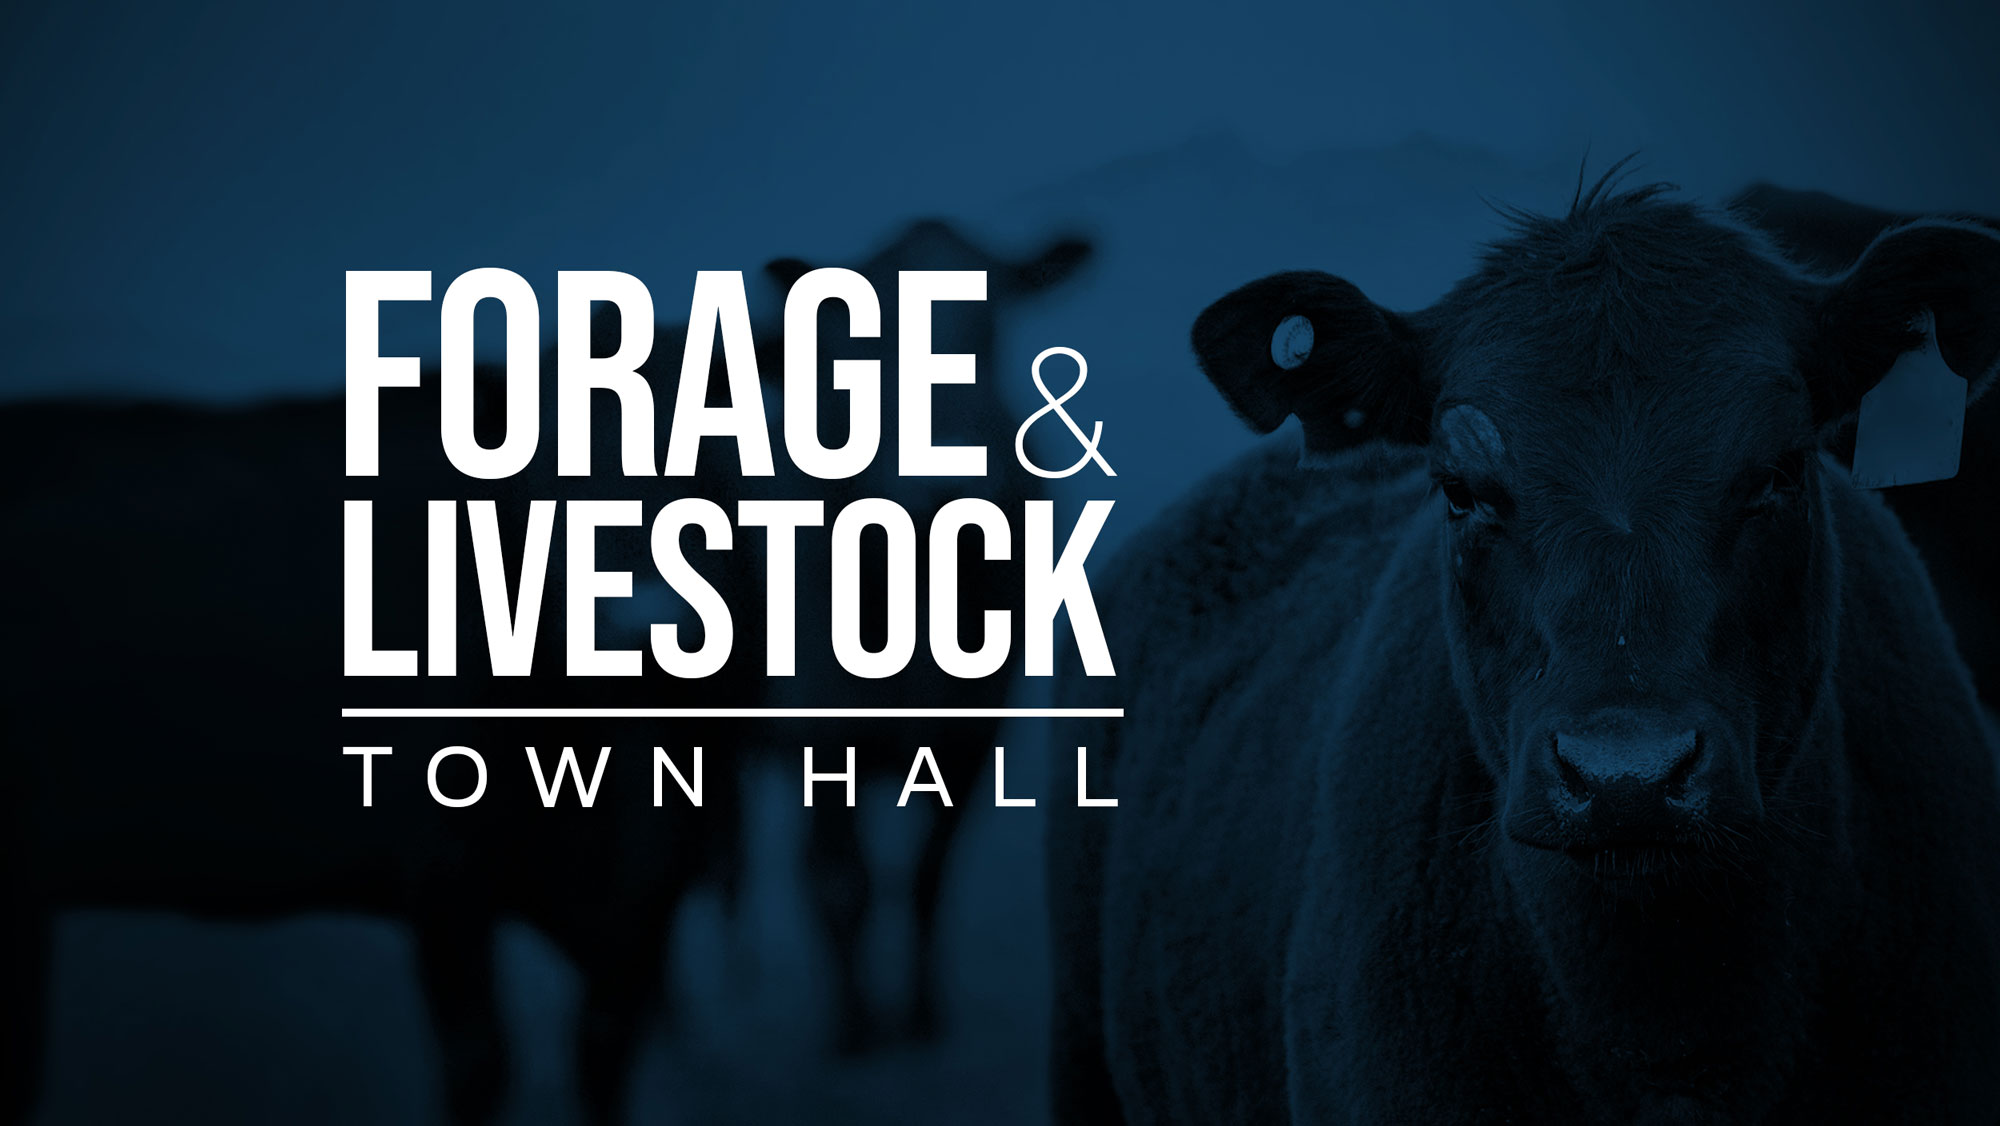 Forage & Livestock Hour with cow